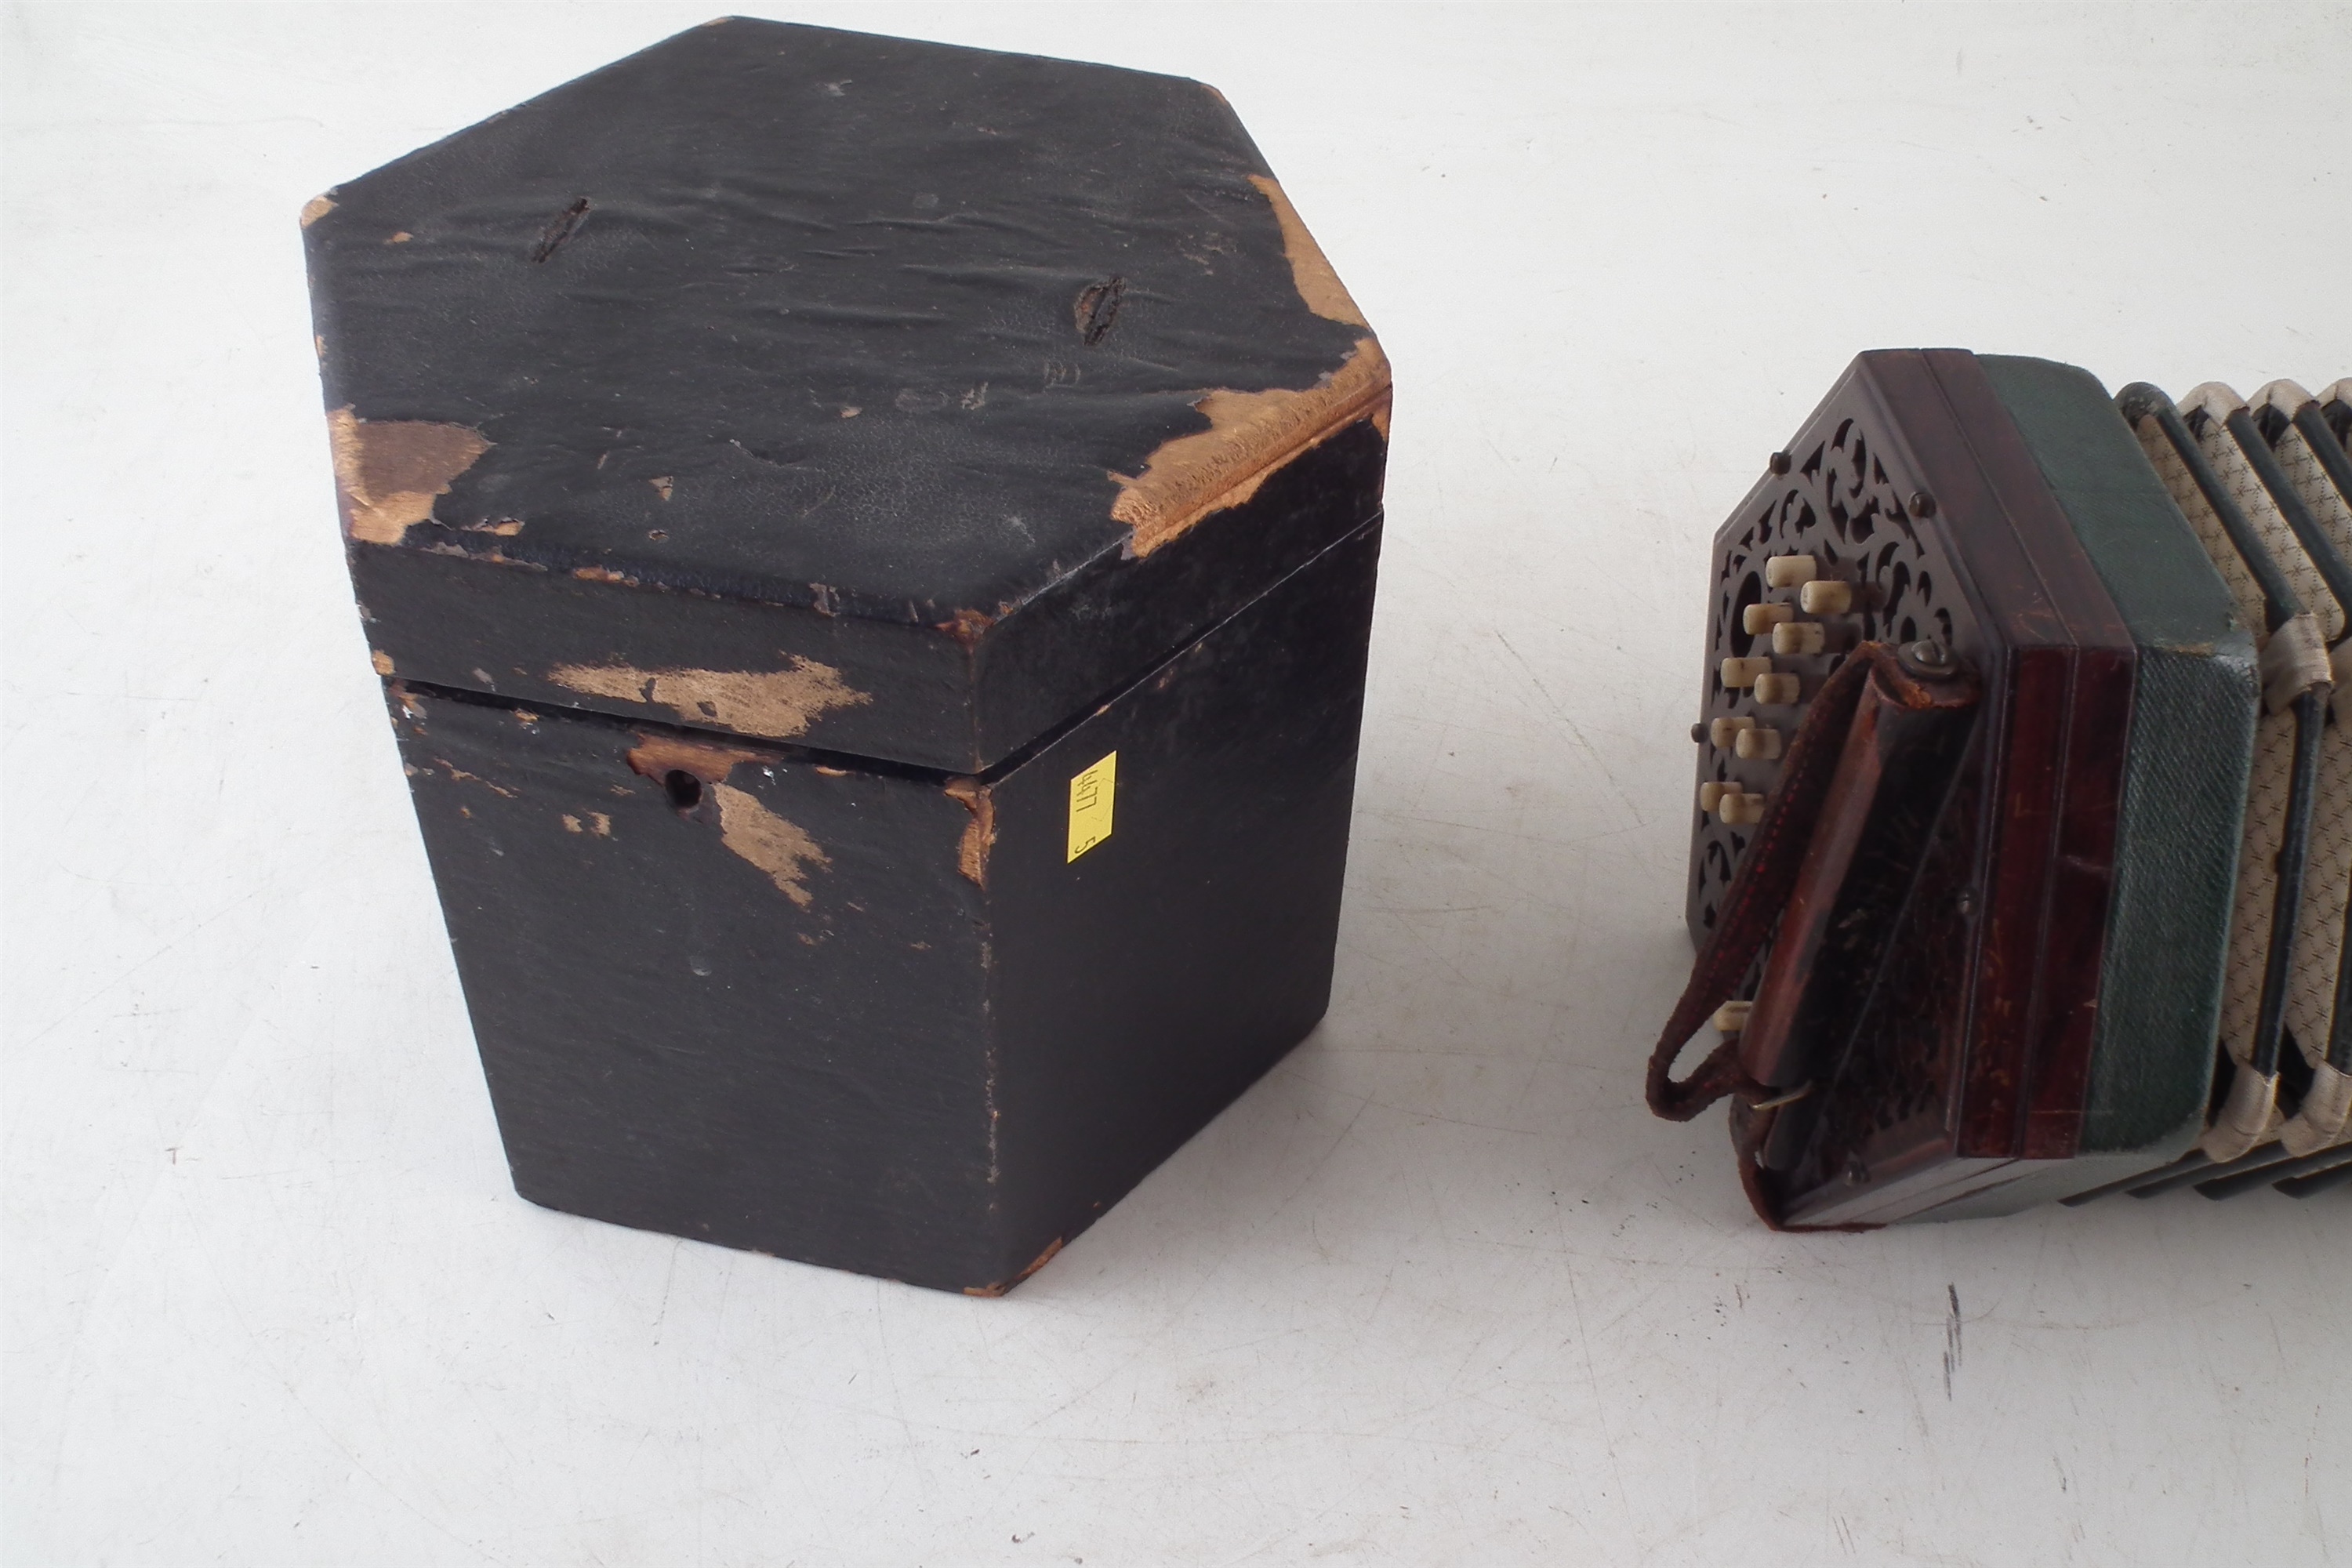 Lachenal 20 key concertina with case - Image 6 of 7